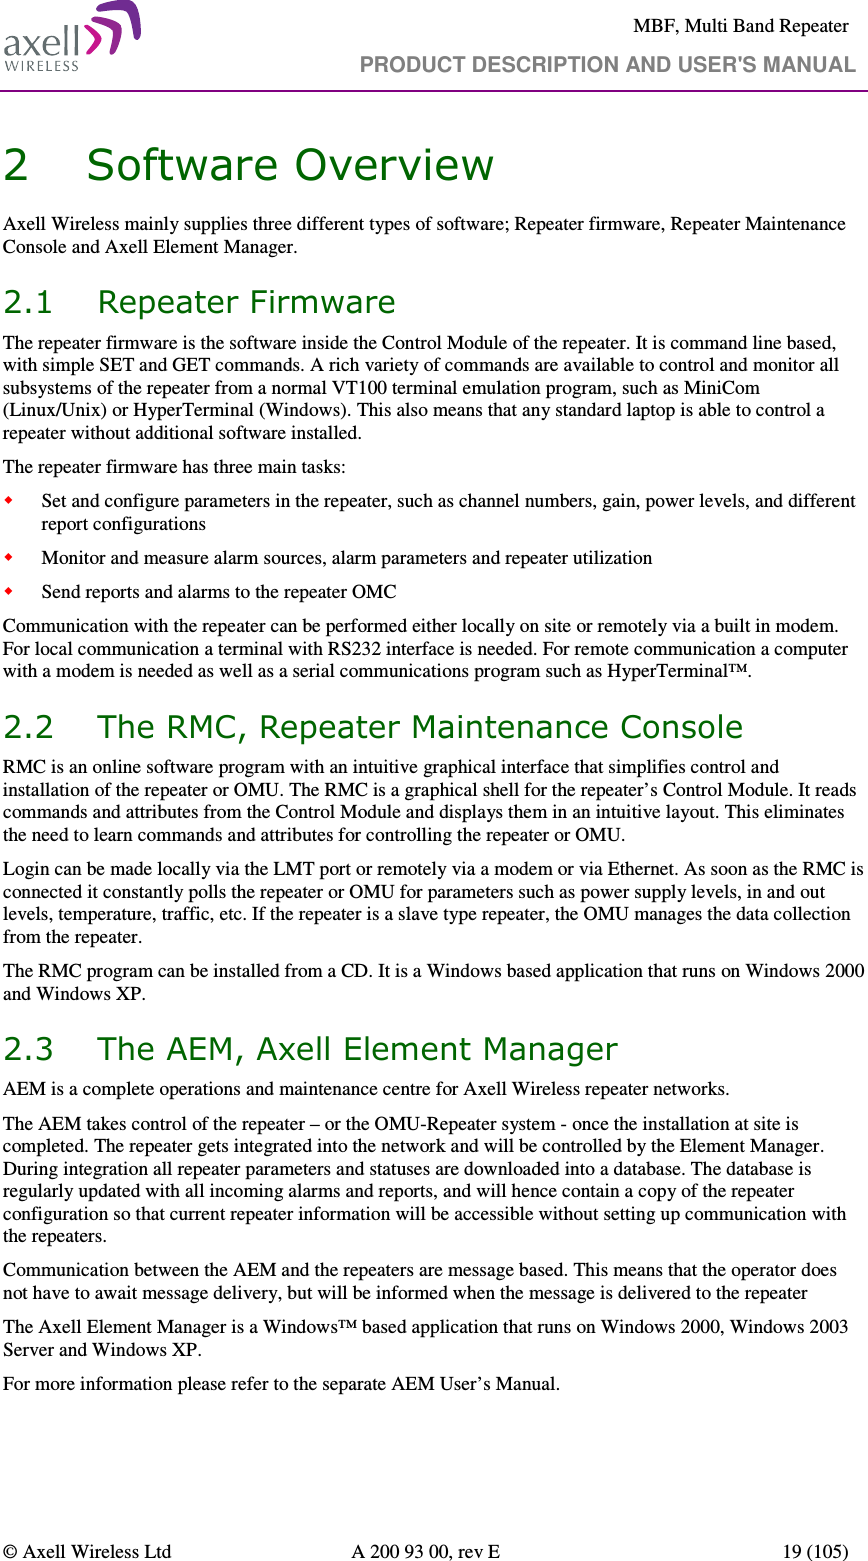     MBF, Multi Band Repeater                                     PRODUCT DESCRIPTION AND USER&apos;S MANUAL   © Axell Wireless Ltd  A 200 93 00, rev E  19 (105)  2 Software Overview Axell Wireless mainly supplies three different types of software; Repeater firmware, Repeater Maintenance Console and Axell Element Manager. 2.1 Repeater Firmware The repeater firmware is the software inside the Control Module of the repeater. It is command line based, with simple SET and GET commands. A rich variety of commands are available to control and monitor all subsystems of the repeater from a normal VT100 terminal emulation program, such as MiniCom (Linux/Unix) or HyperTerminal (Windows). This also means that any standard laptop is able to control a repeater without additional software installed. The repeater firmware has three main tasks:  Set and configure parameters in the repeater, such as channel numbers, gain, power levels, and different report configurations  Monitor and measure alarm sources, alarm parameters and repeater utilization  Send reports and alarms to the repeater OMC Communication with the repeater can be performed either locally on site or remotely via a built in modem.  For local communication a terminal with RS232 interface is needed. For remote communication a computer with a modem is needed as well as a serial communications program such as HyperTerminal™. 2.2 The RMC, Repeater Maintenance Console  RMC is an online software program with an intuitive graphical interface that simplifies control and installation of the repeater or OMU. The RMC is a graphical shell for the repeater’s Control Module. It reads commands and attributes from the Control Module and displays them in an intuitive layout. This eliminates the need to learn commands and attributes for controlling the repeater or OMU. Login can be made locally via the LMT port or remotely via a modem or via Ethernet. As soon as the RMC is connected it constantly polls the repeater or OMU for parameters such as power supply levels, in and out levels, temperature, traffic, etc. If the repeater is a slave type repeater, the OMU manages the data collection from the repeater. The RMC program can be installed from a CD. It is a Windows based application that runs on Windows 2000 and Windows XP. 2.3 The AEM, Axell Element Manager AEM is a complete operations and maintenance centre for Axell Wireless repeater networks. The AEM takes control of the repeater – or the OMU-Repeater system - once the installation at site is completed. The repeater gets integrated into the network and will be controlled by the Element Manager. During integration all repeater parameters and statuses are downloaded into a database. The database is regularly updated with all incoming alarms and reports, and will hence contain a copy of the repeater configuration so that current repeater information will be accessible without setting up communication with the repeaters.   Communication between the AEM and the repeaters are message based. This means that the operator does not have to await message delivery, but will be informed when the message is delivered to the repeater The Axell Element Manager is a Windows™ based application that runs on Windows 2000, Windows 2003 Server and Windows XP. For more information please refer to the separate AEM User’s Manual. 